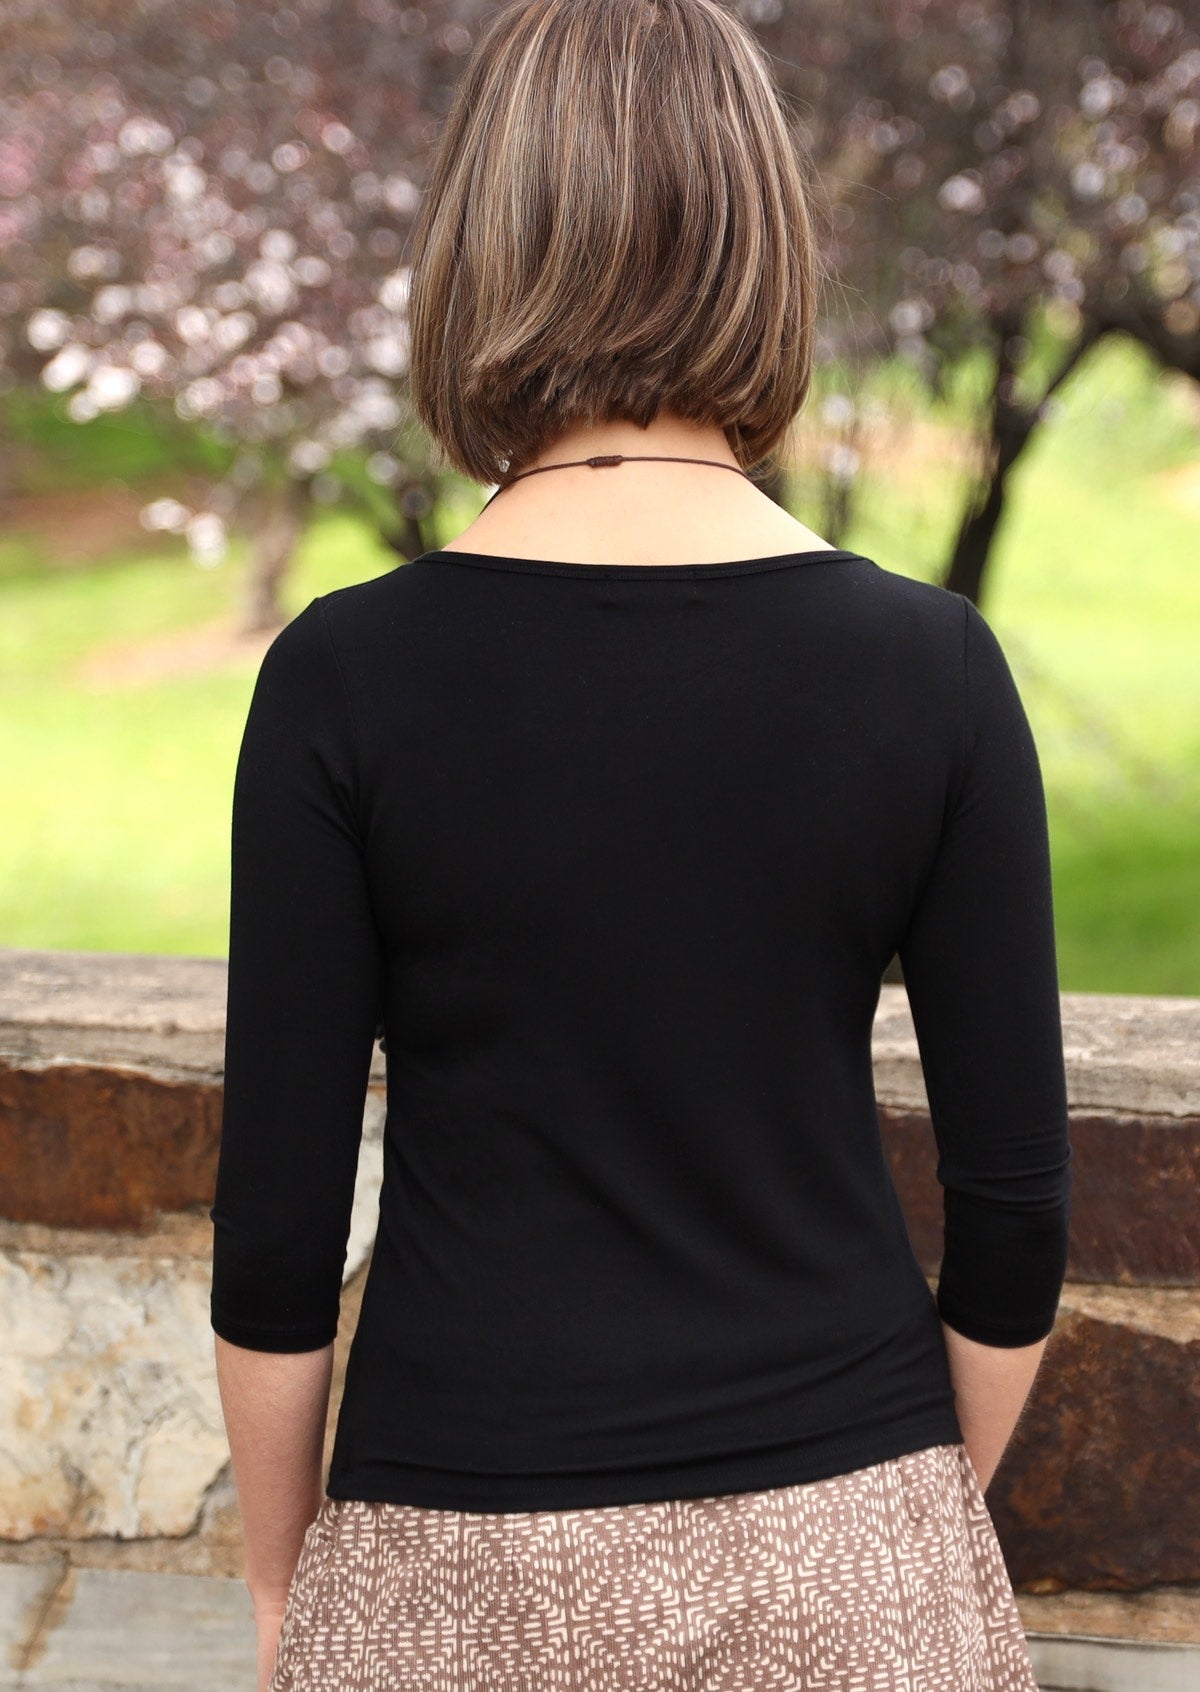 Back view of woman wearing a rayon boat neck black 3/4 sleeve top